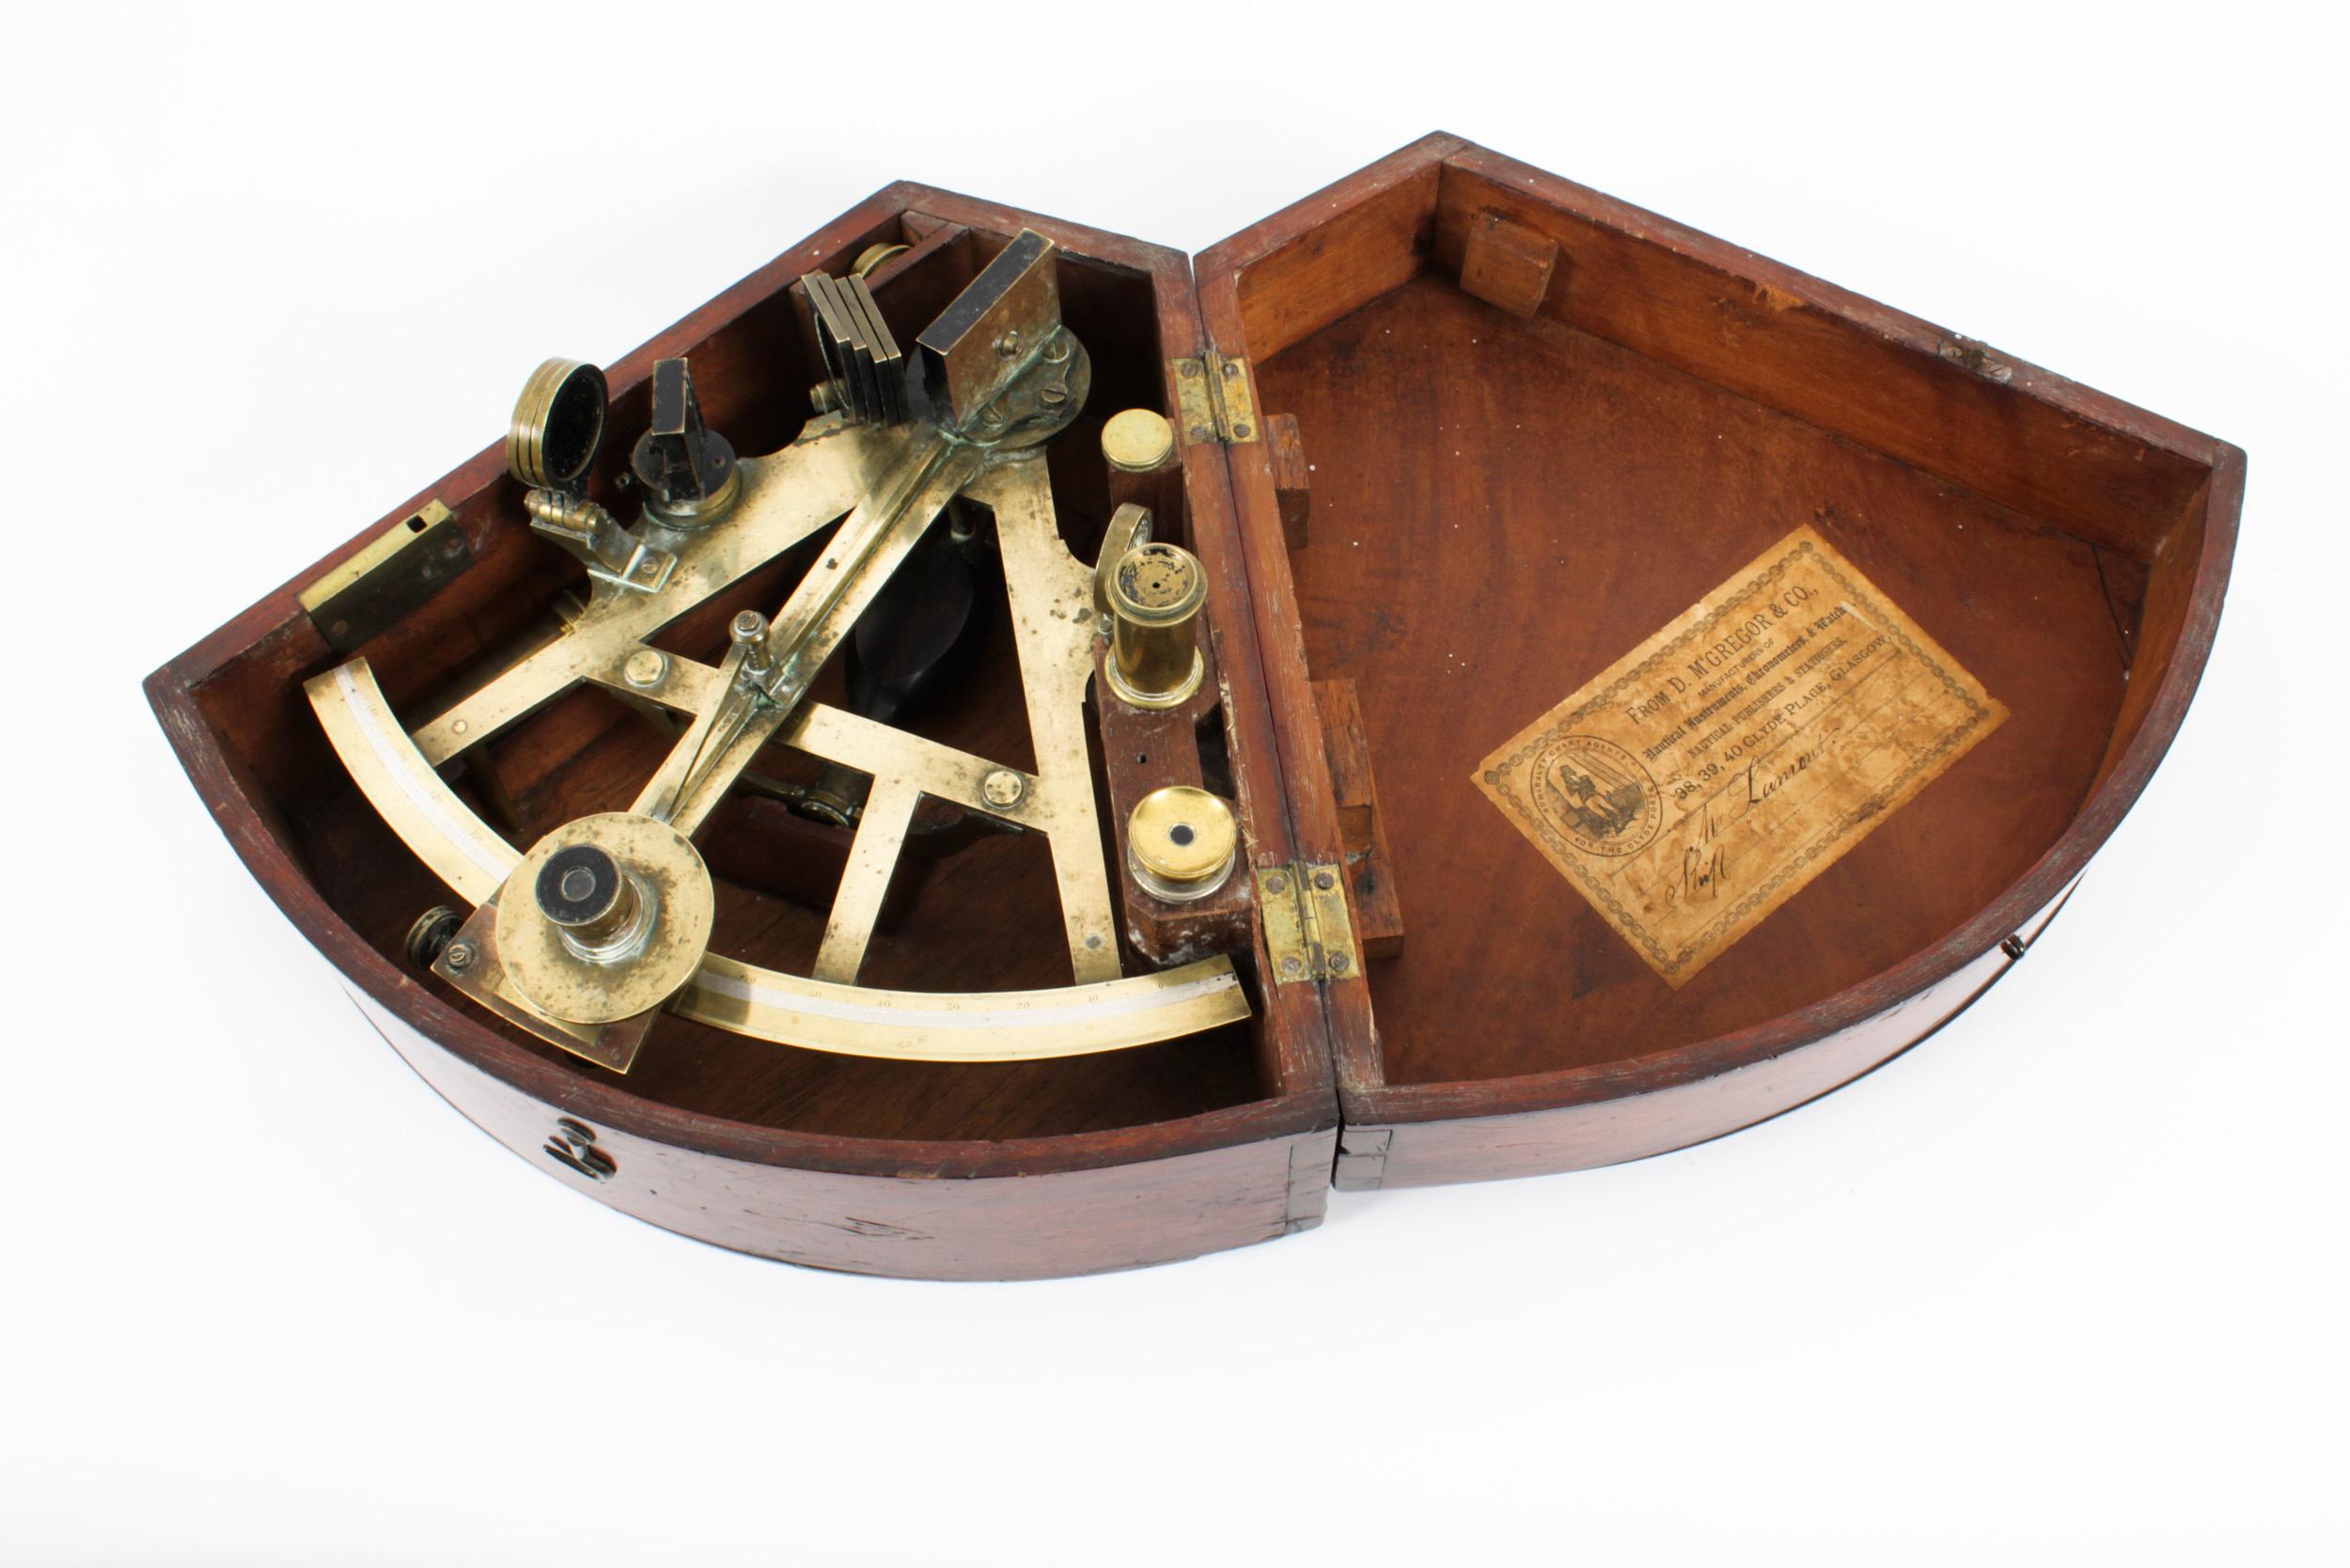 A rare mahogany cased single framed sextant by D McGregor & Co of Clyde Place, Glasgow, dating from the late 19th Century.
 
This example is comprised of one frame connected by numerous pillars with index arm containing a Vernier and clamp release